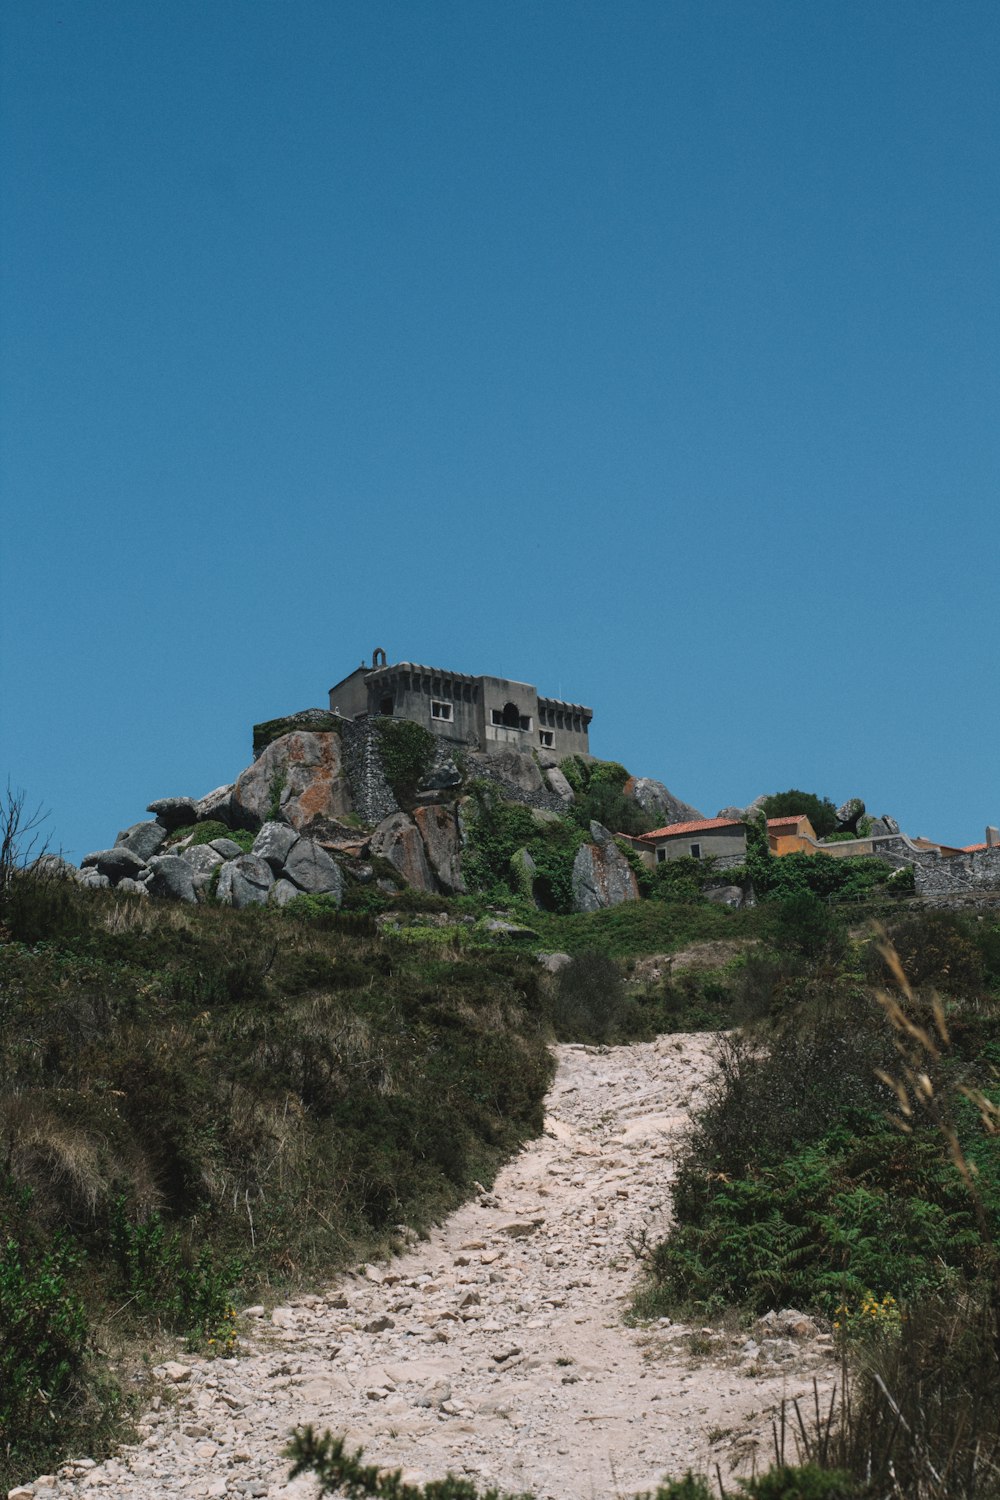 a stone building on a hill